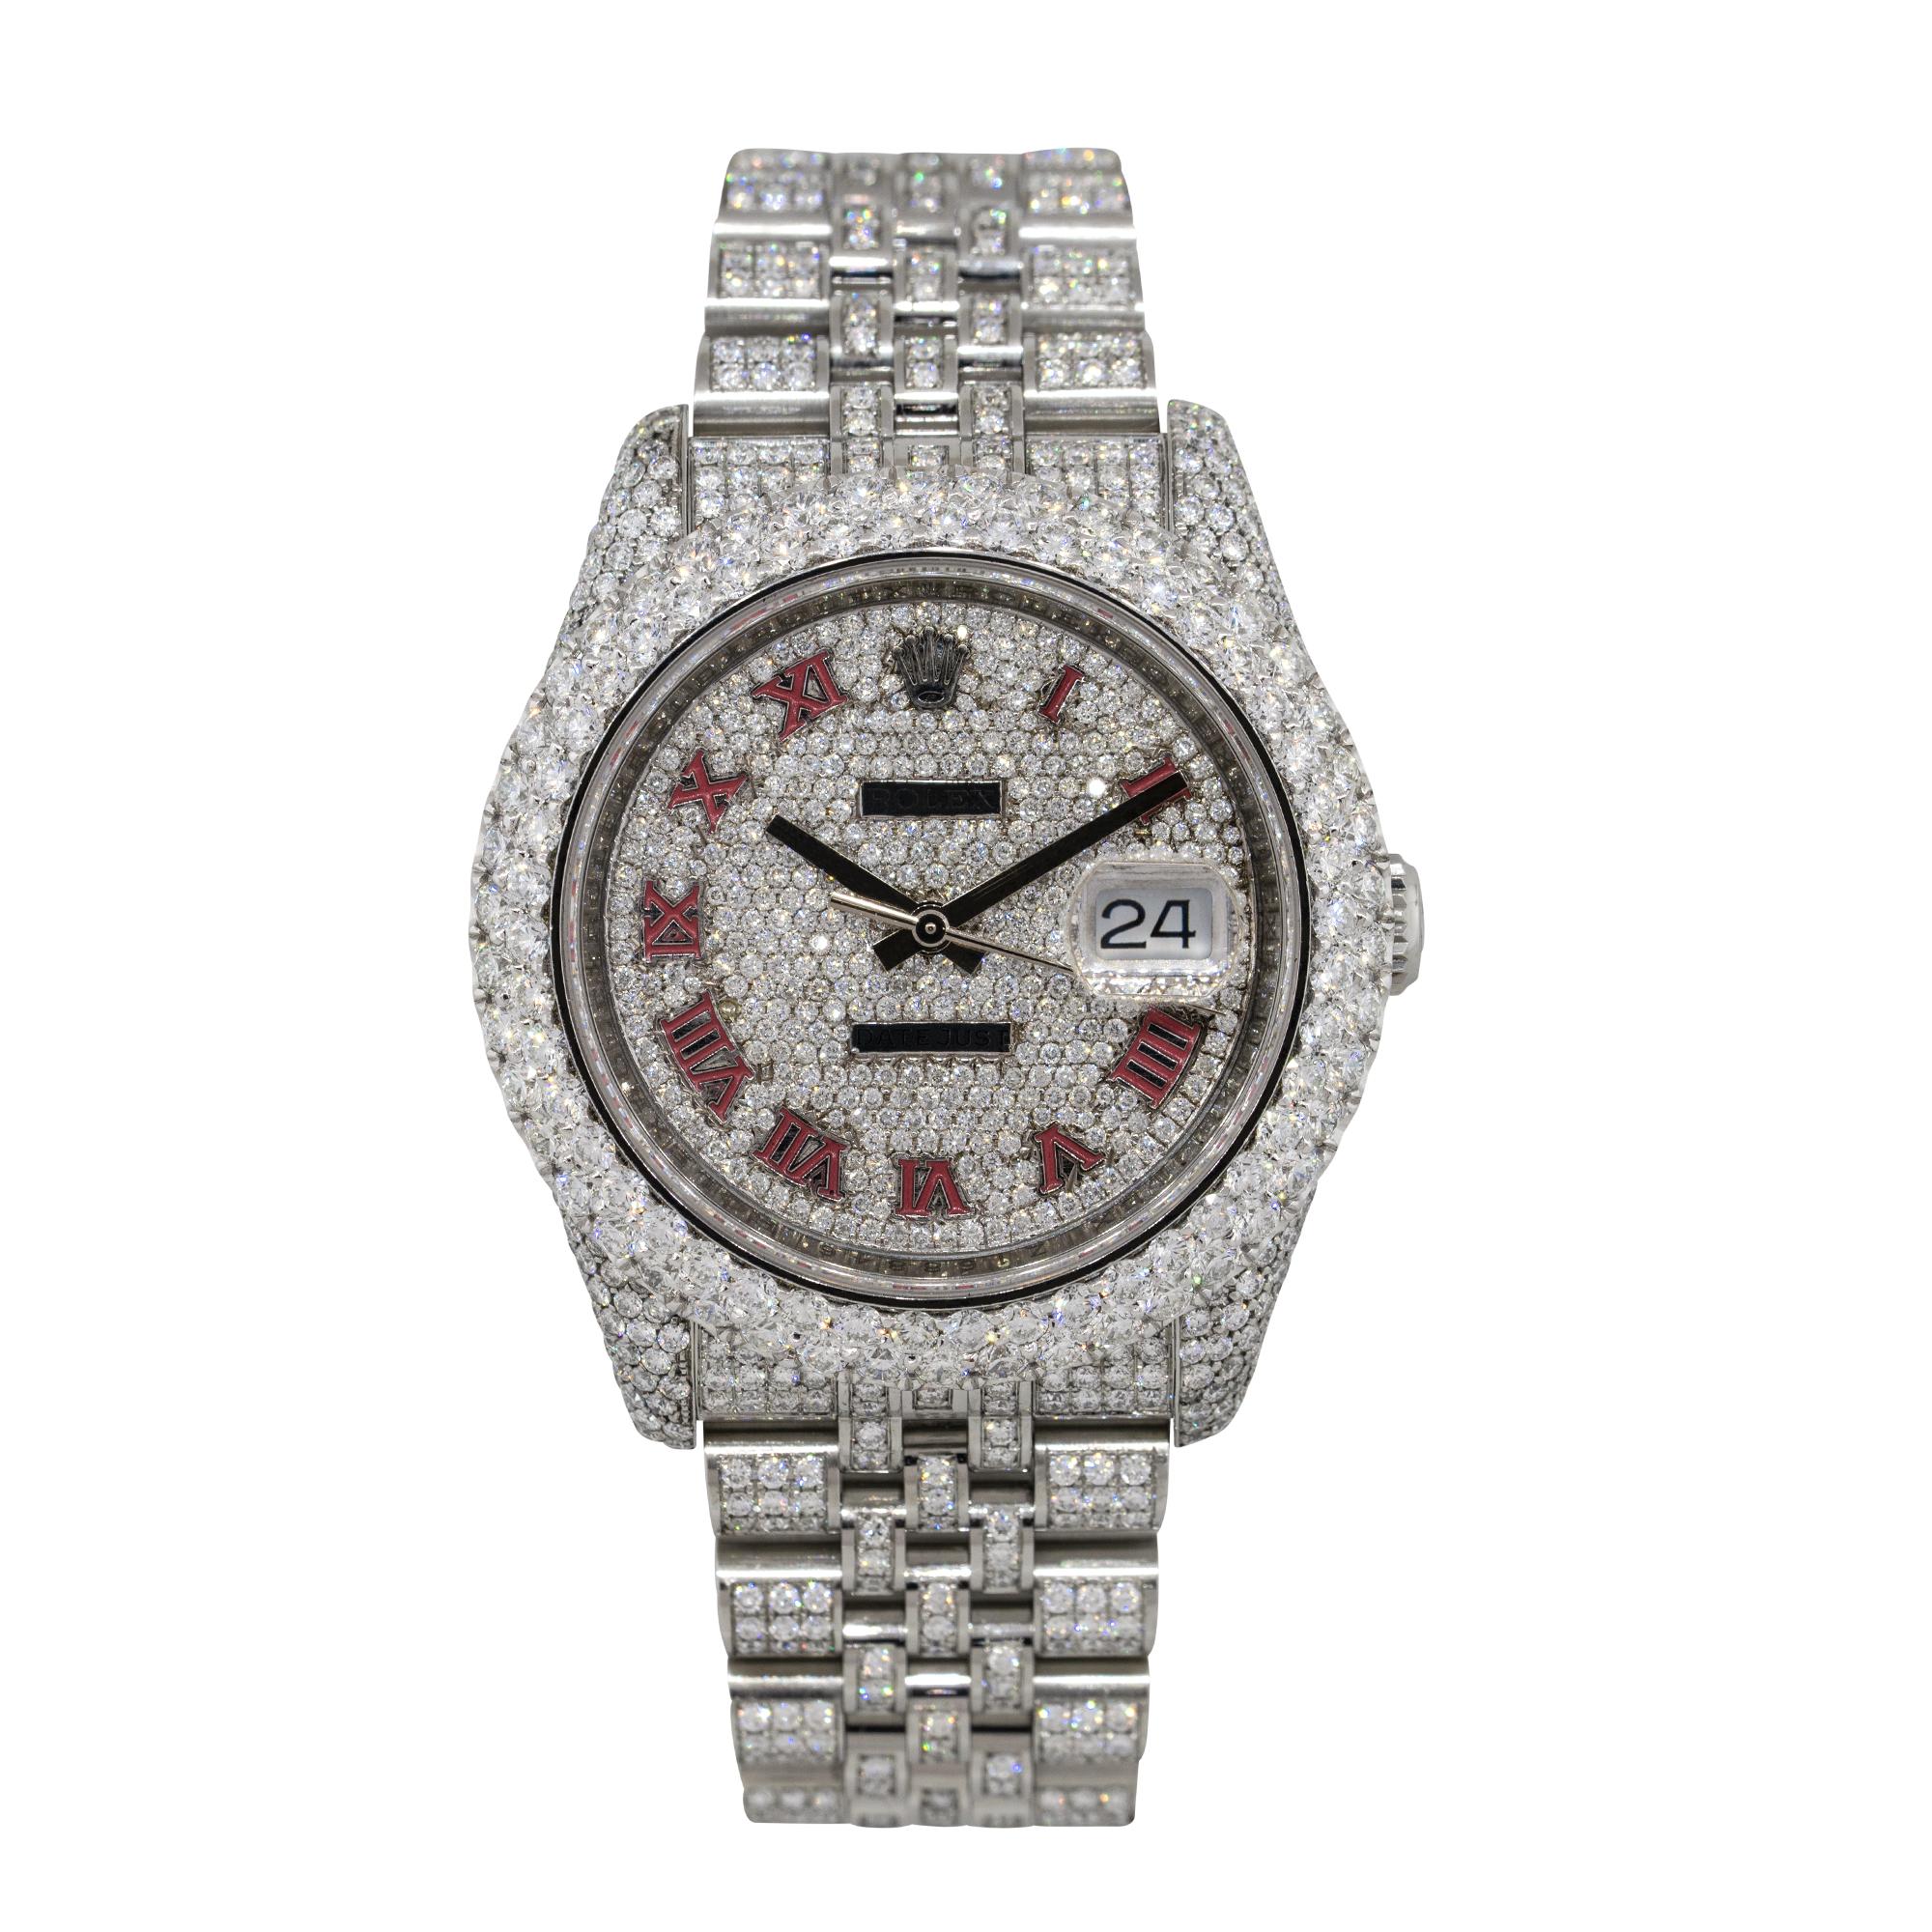 Brand: Rolex
MPN: 116234
Model: Datejust
Case Material: Stainless steel with aftermarket Diamonds
Case Diameter: 36mm
Crystal: Sapphire Crystal
Bezel: Stainless steel bezel with double row of aftermarket Diamonds
Dial: Aftermarket Diamond pave dial